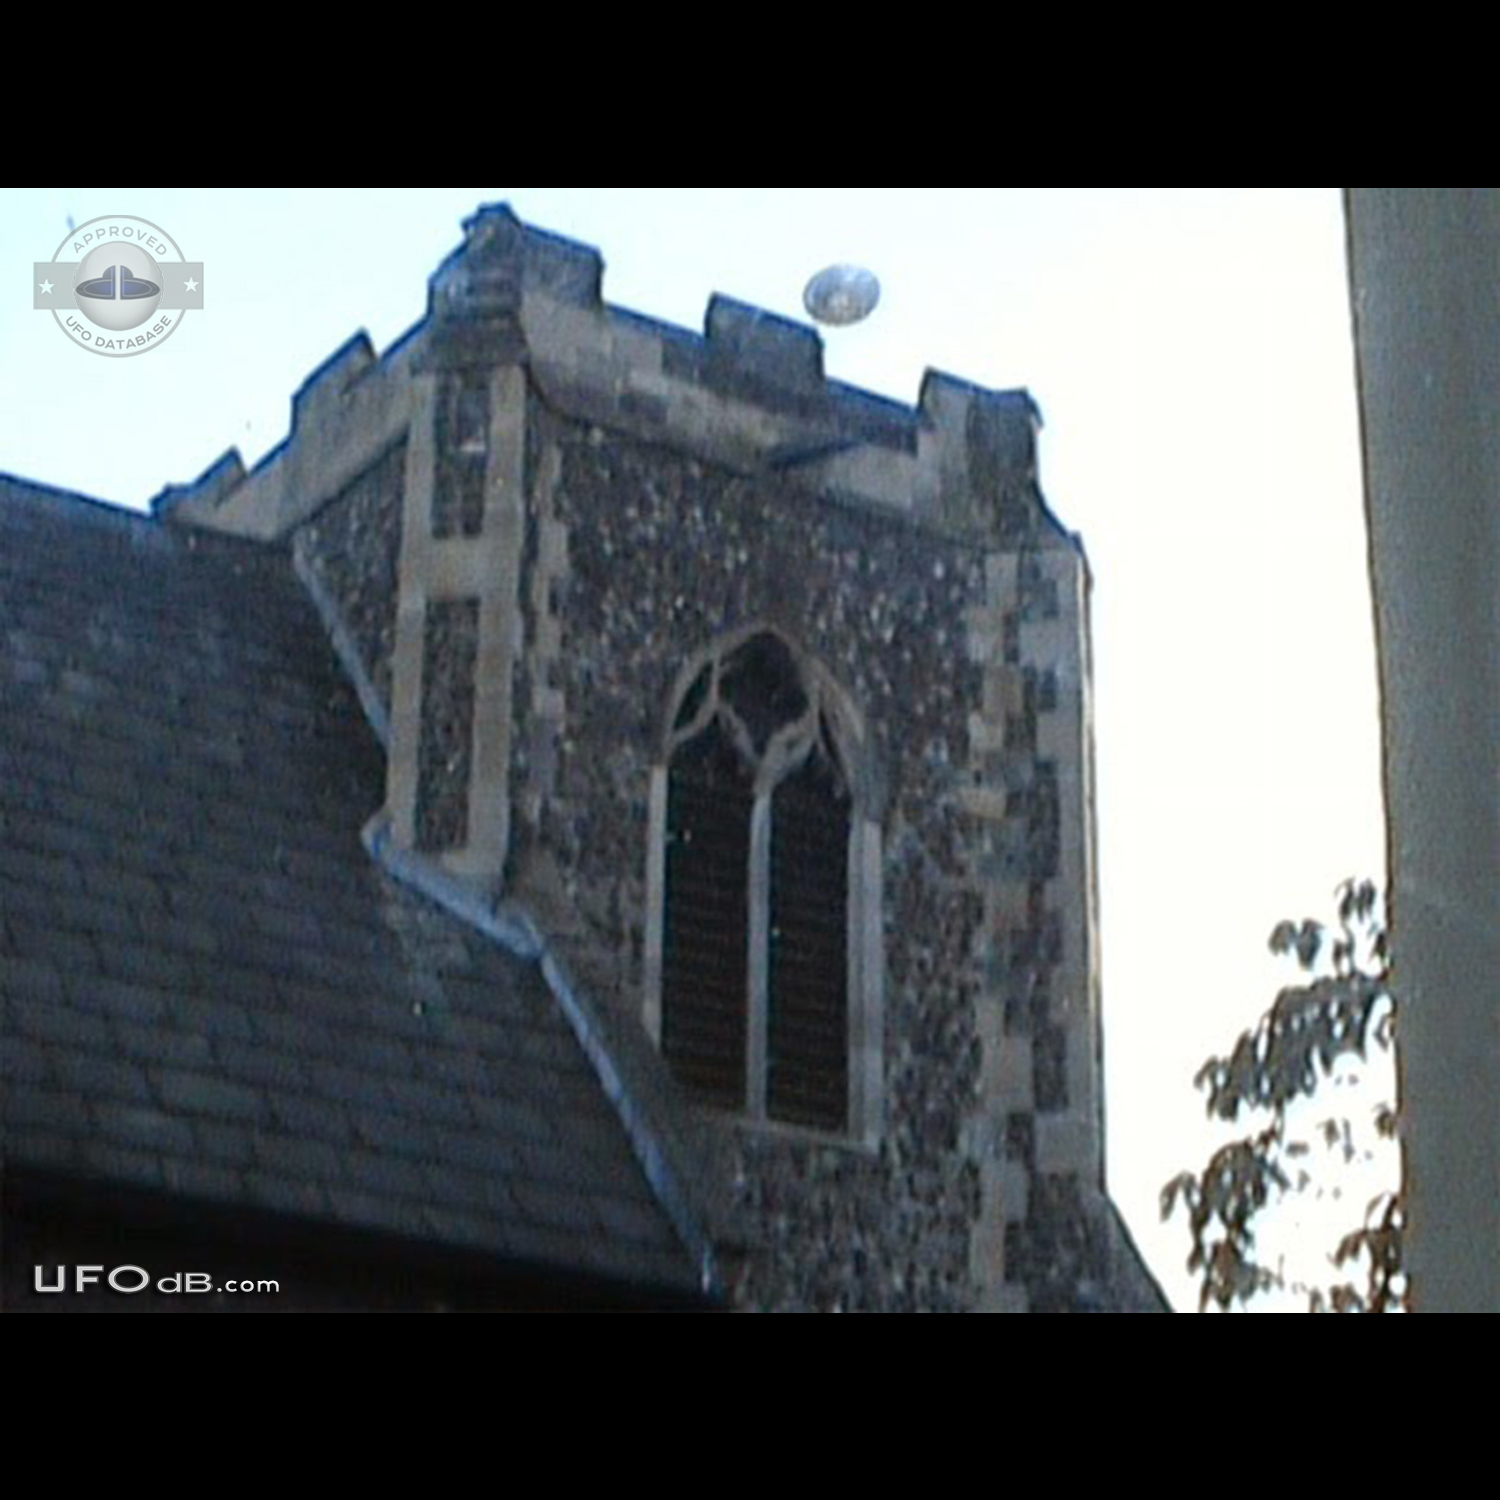 Saucer UFO seen right over Church in Norwich, Norfolk UK 2005 UFO Picture #587-1